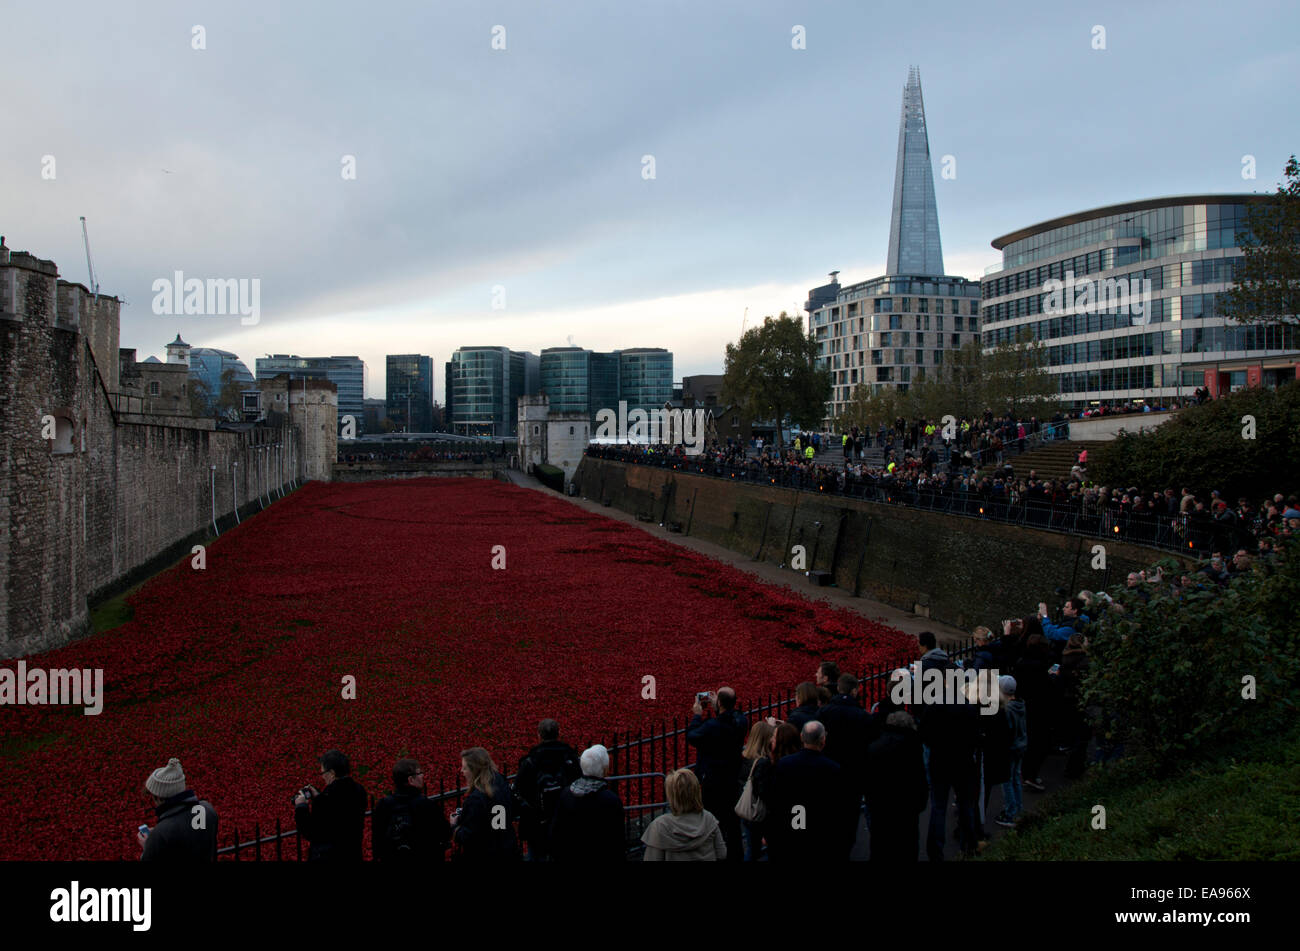 Crowds gather early in the morning of Remembrance Sunday 9th November 2014 at the Tower of London, to see the poppies in the moat. Stock Photo